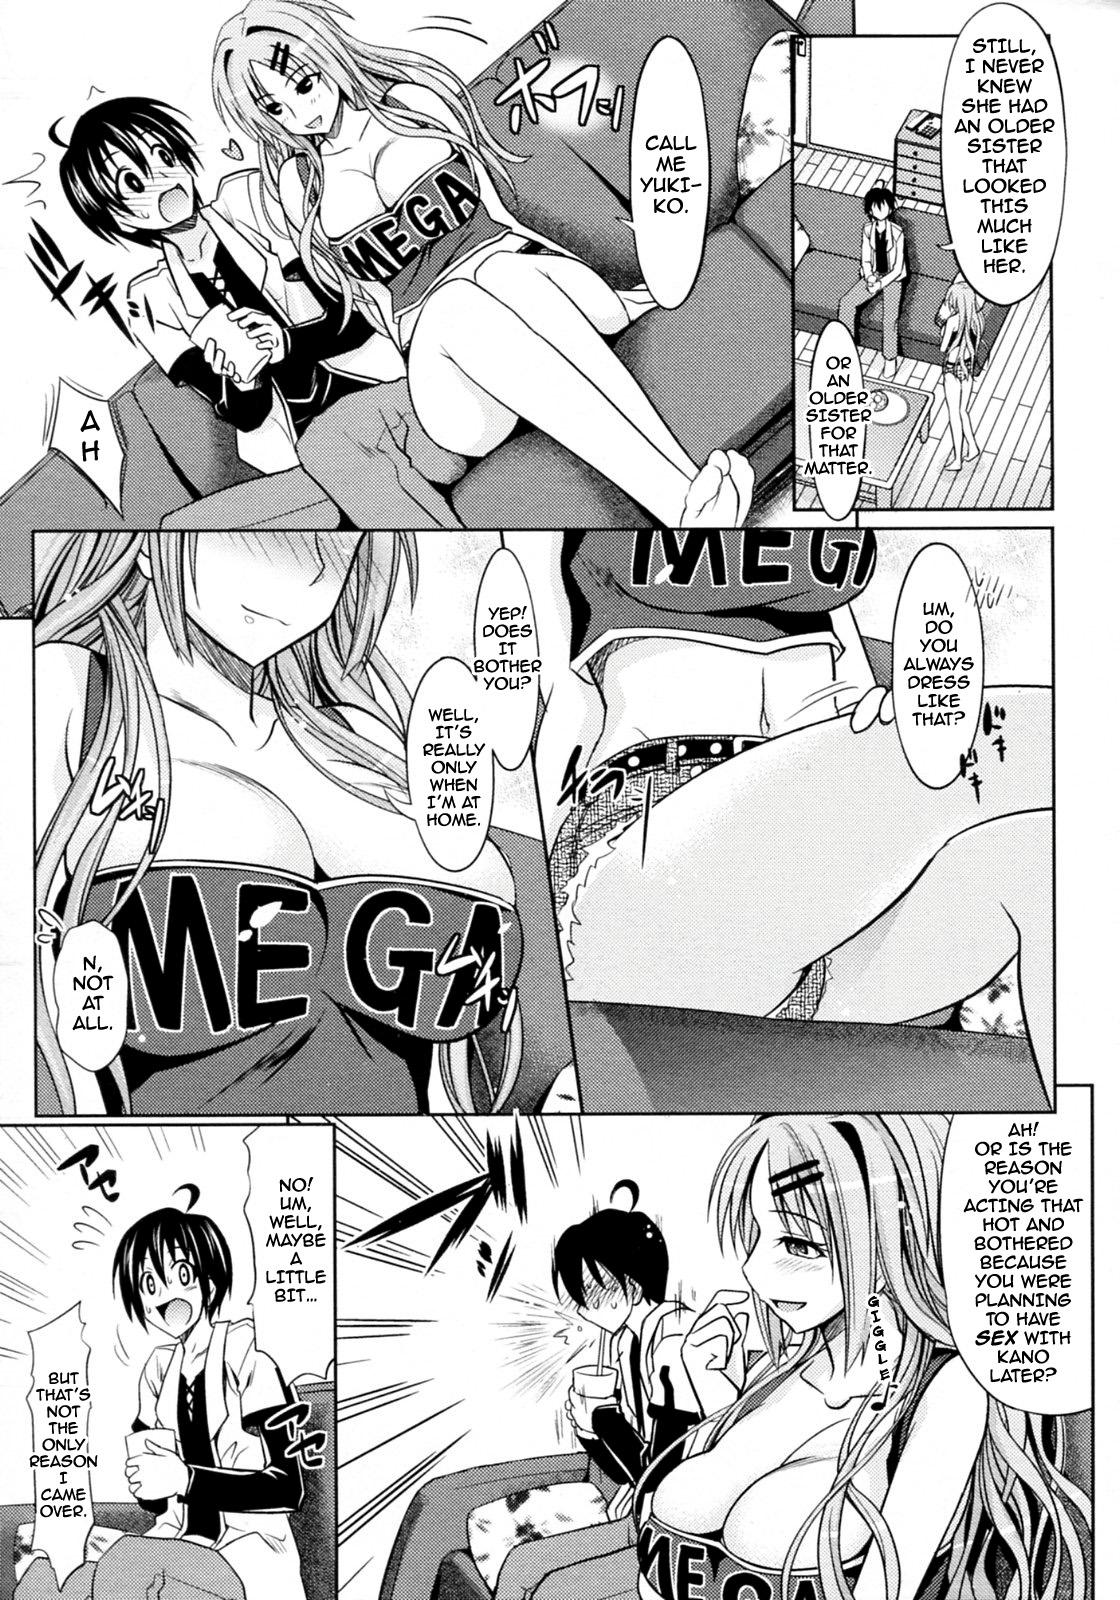 4some Change★ POV - Page 9